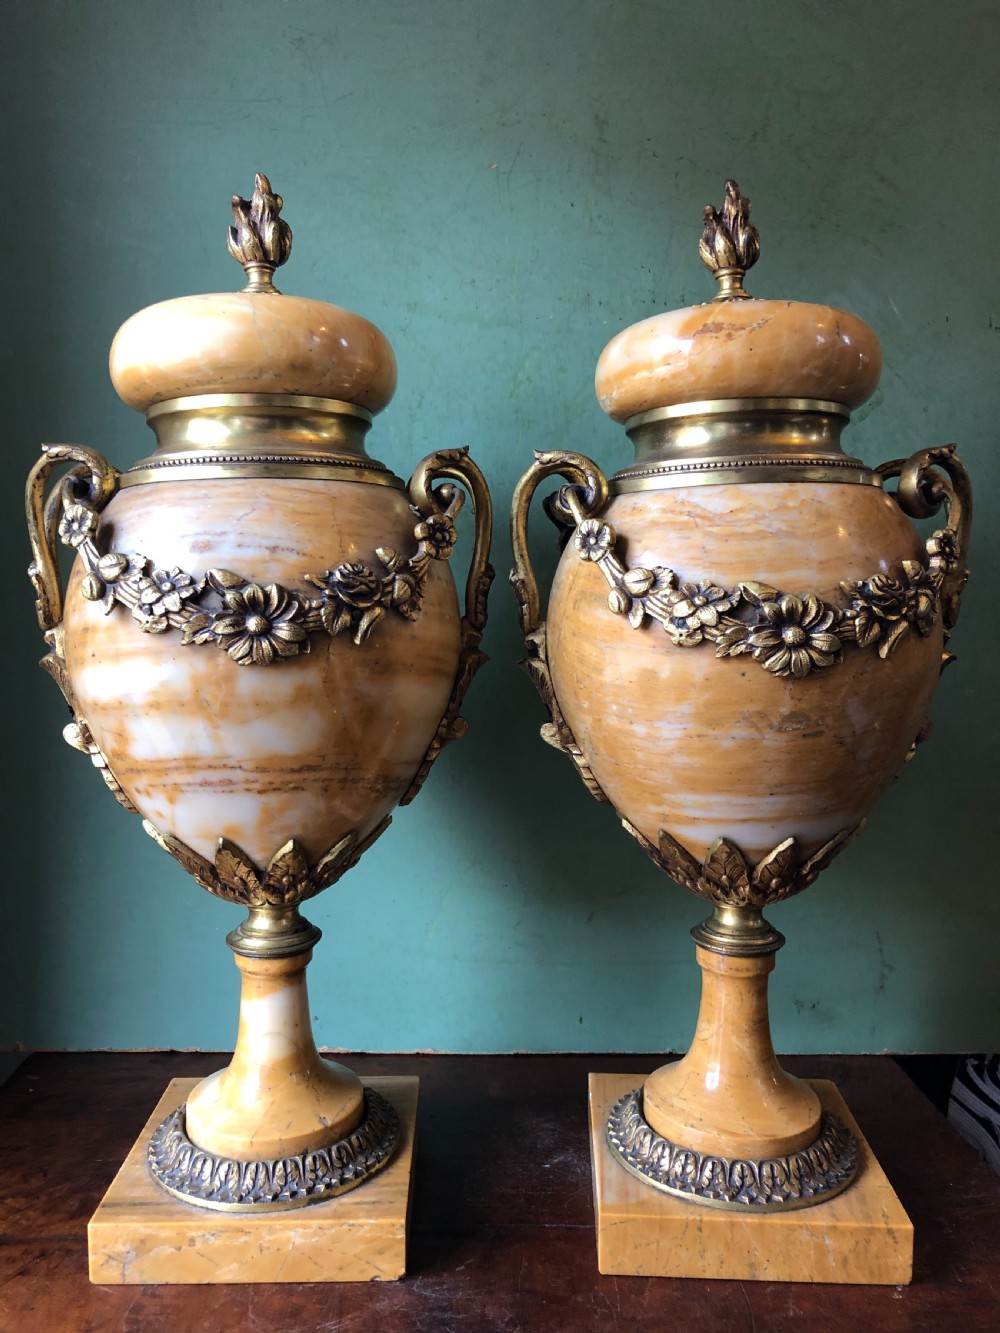 pair of late c19th early c20th french ormolumounted giallo di siena marble vases or cassolettes